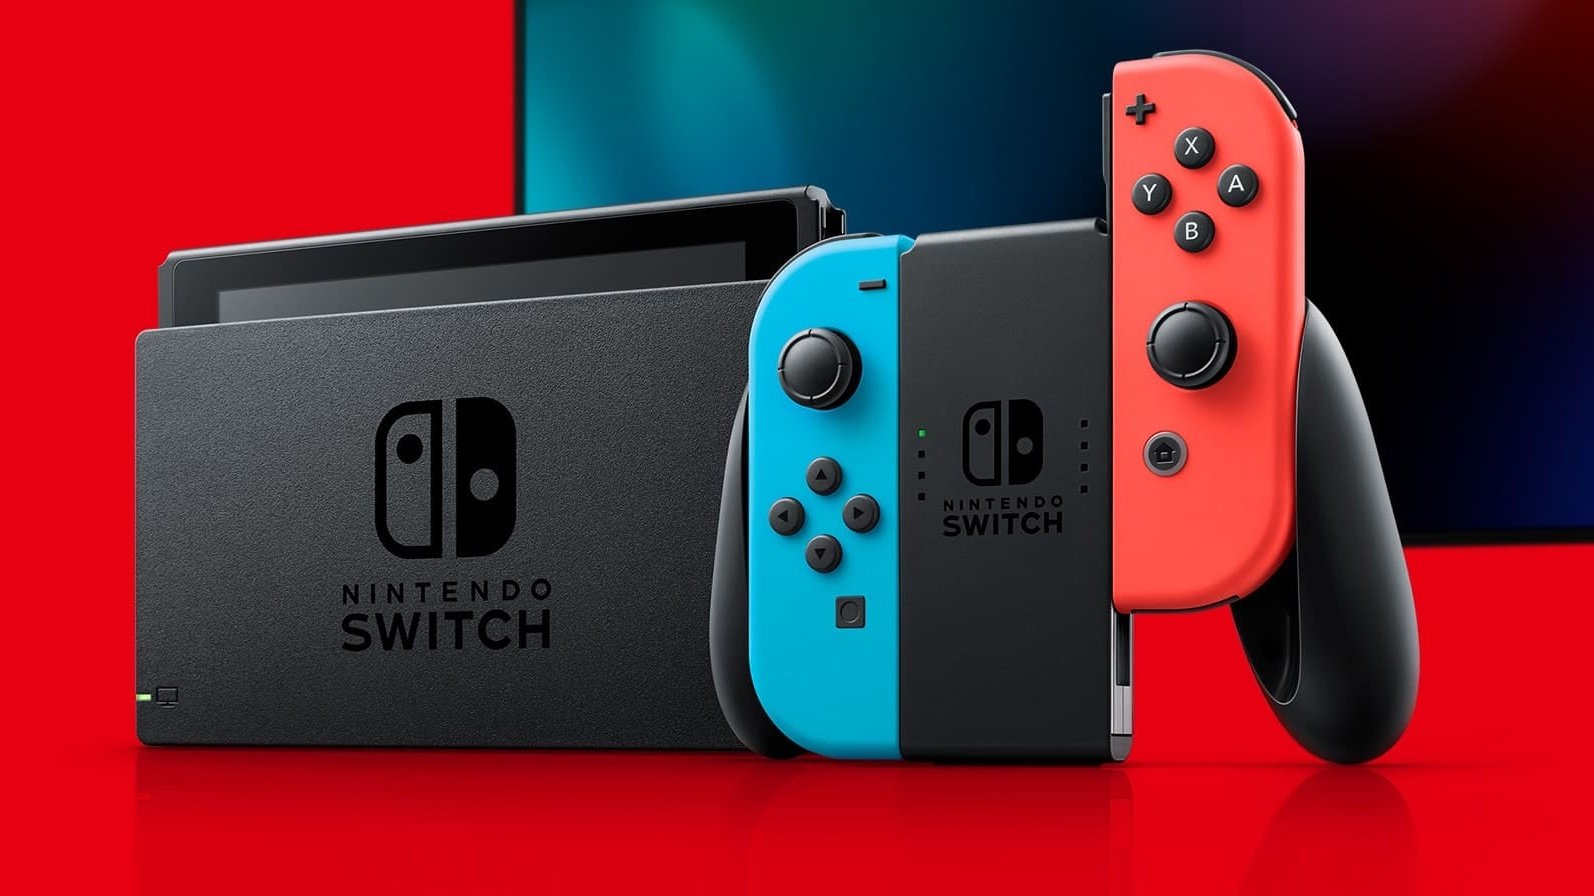 Nintendo Switch Players Advised To Secure Accounts After Numerous